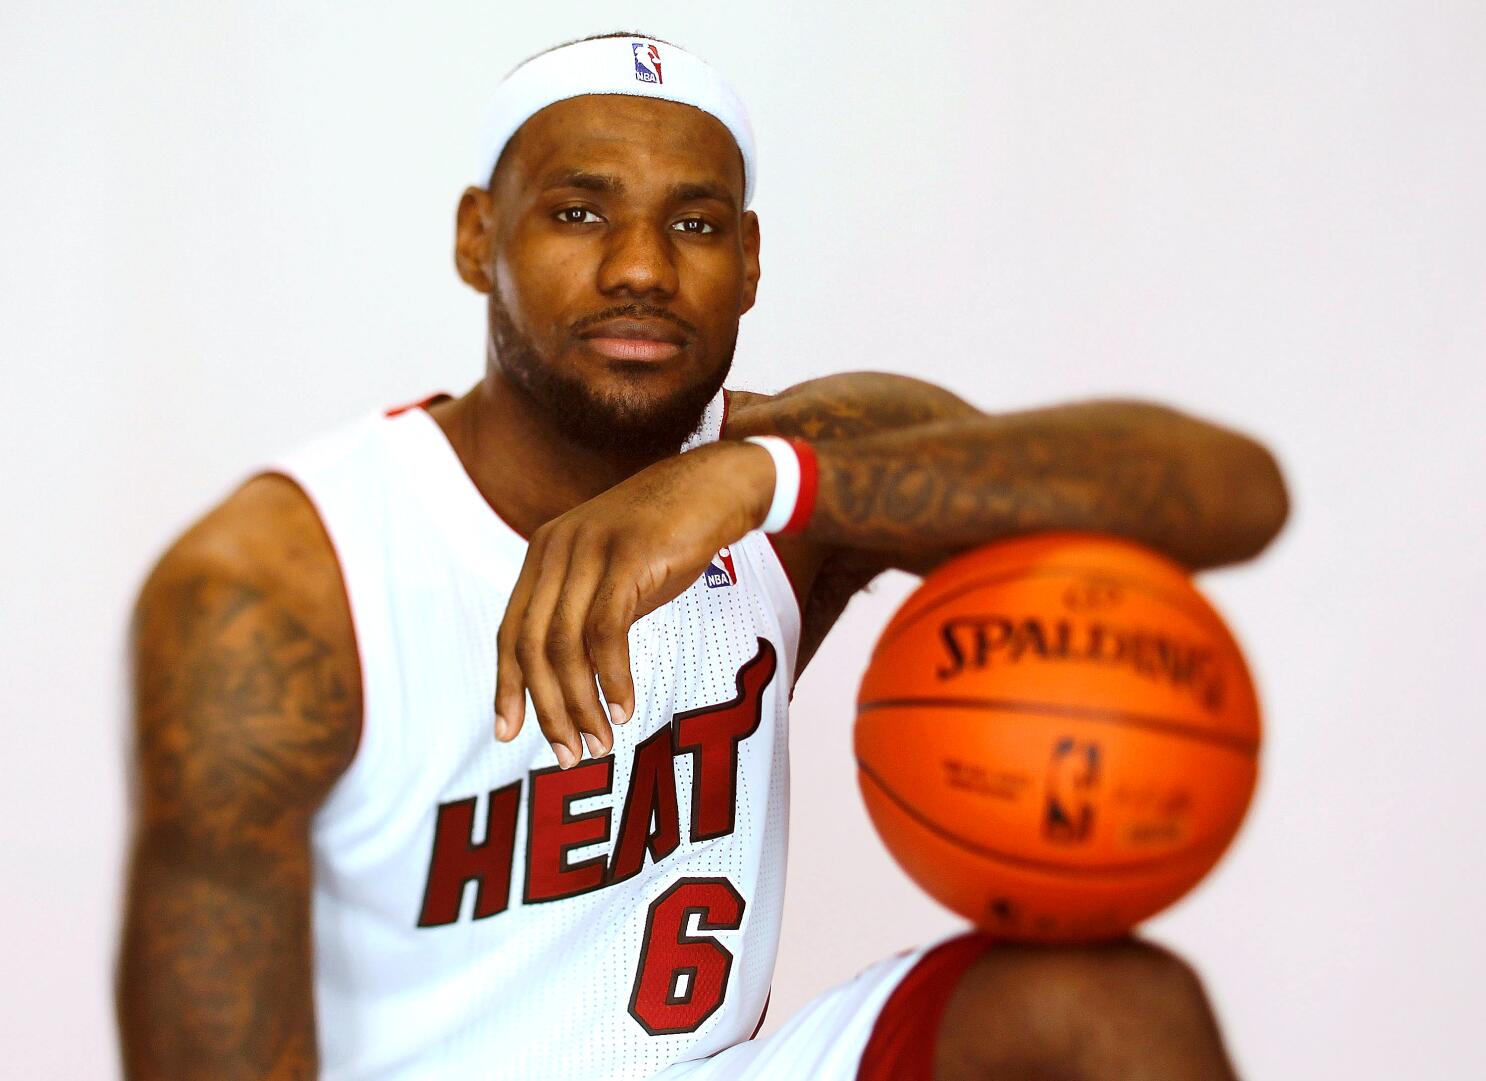 Miami Heat's LeBron James finally puts to rest talk of him not